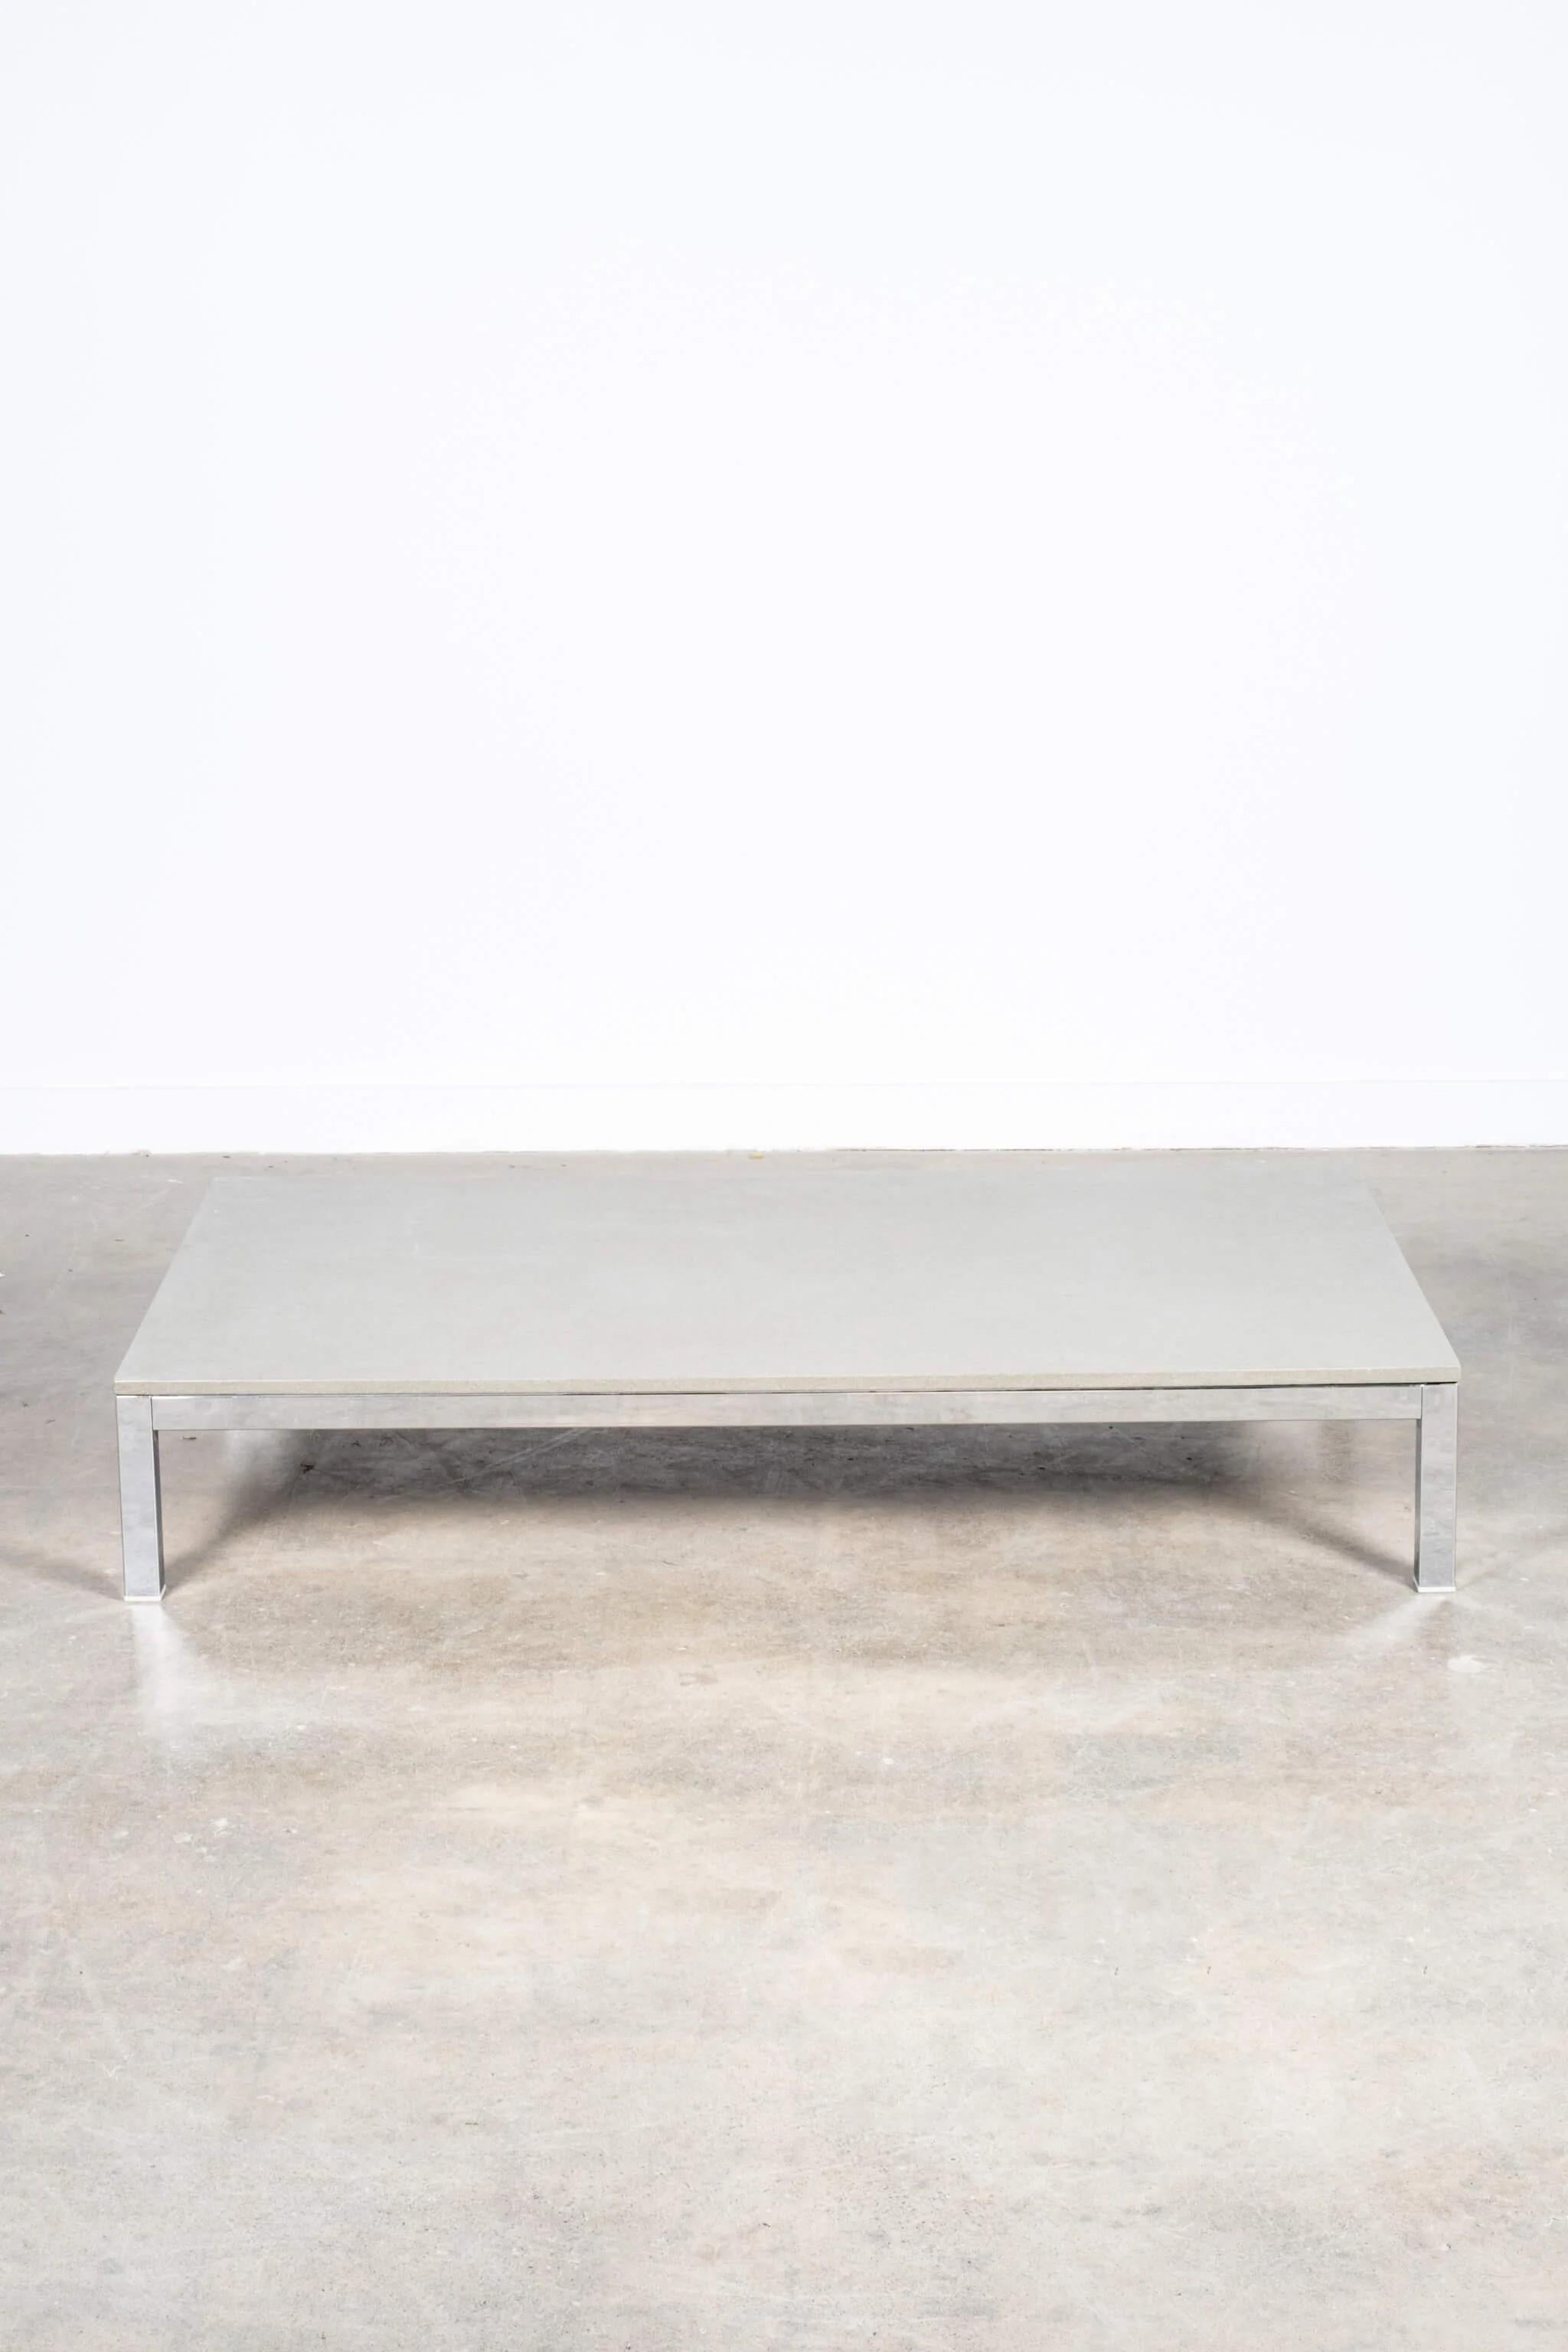 Late 20th Century Minotti Low-Profile Chrome Coffee Table with Stone Top For Sale